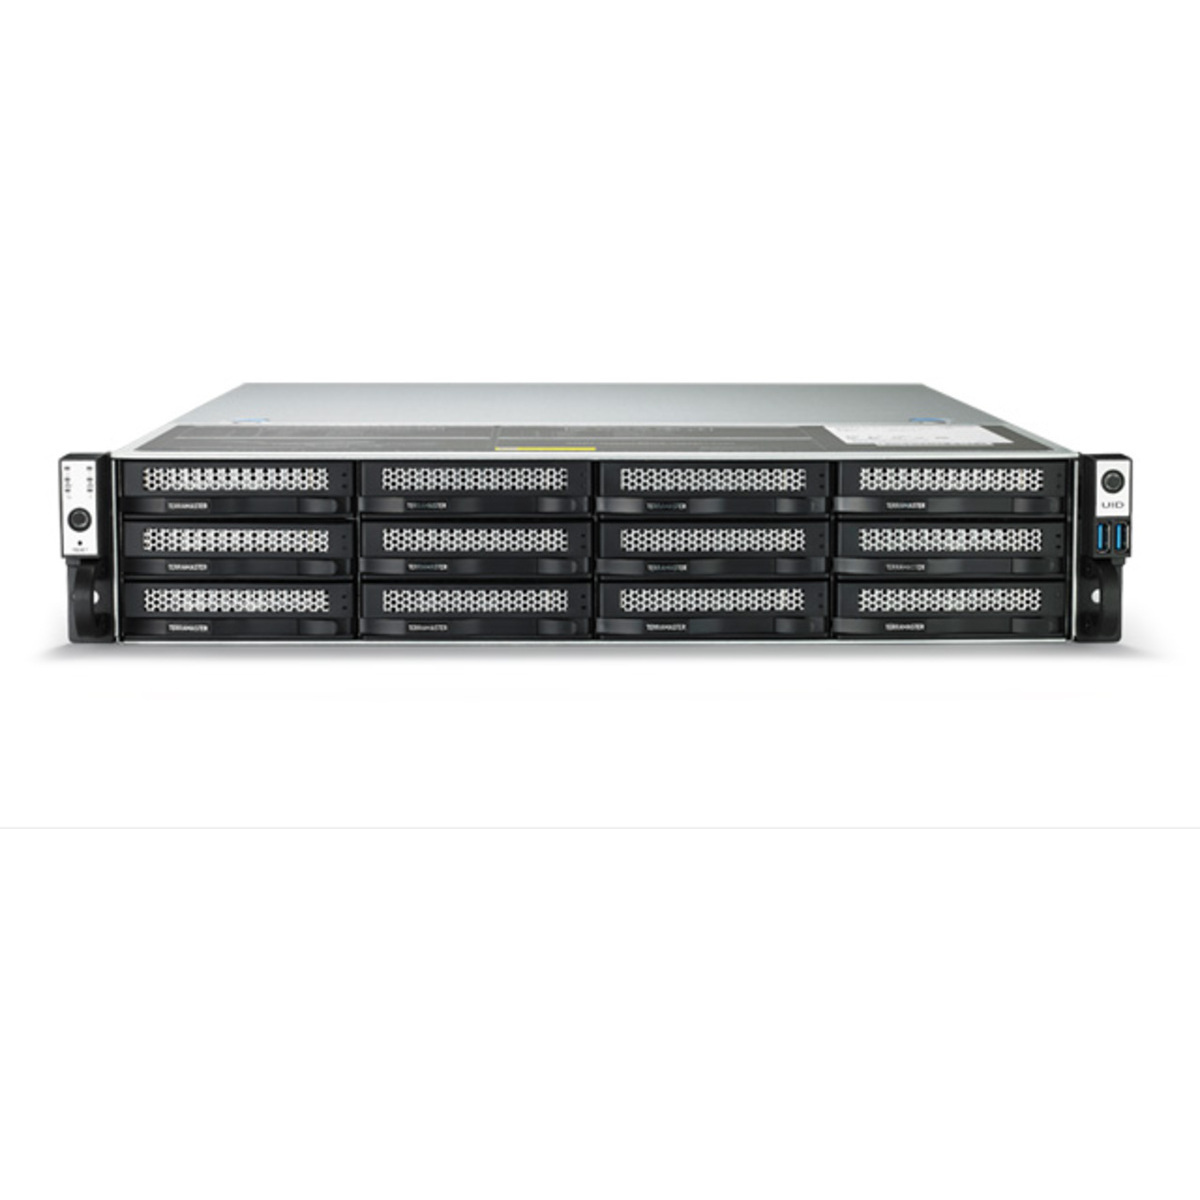 TerraMaster U12-722-2224 RackMount 12-Bay Large Business / Enterprise NAS - Network Attached Storage Device Burn-In Tested Configurations U12-722-2224